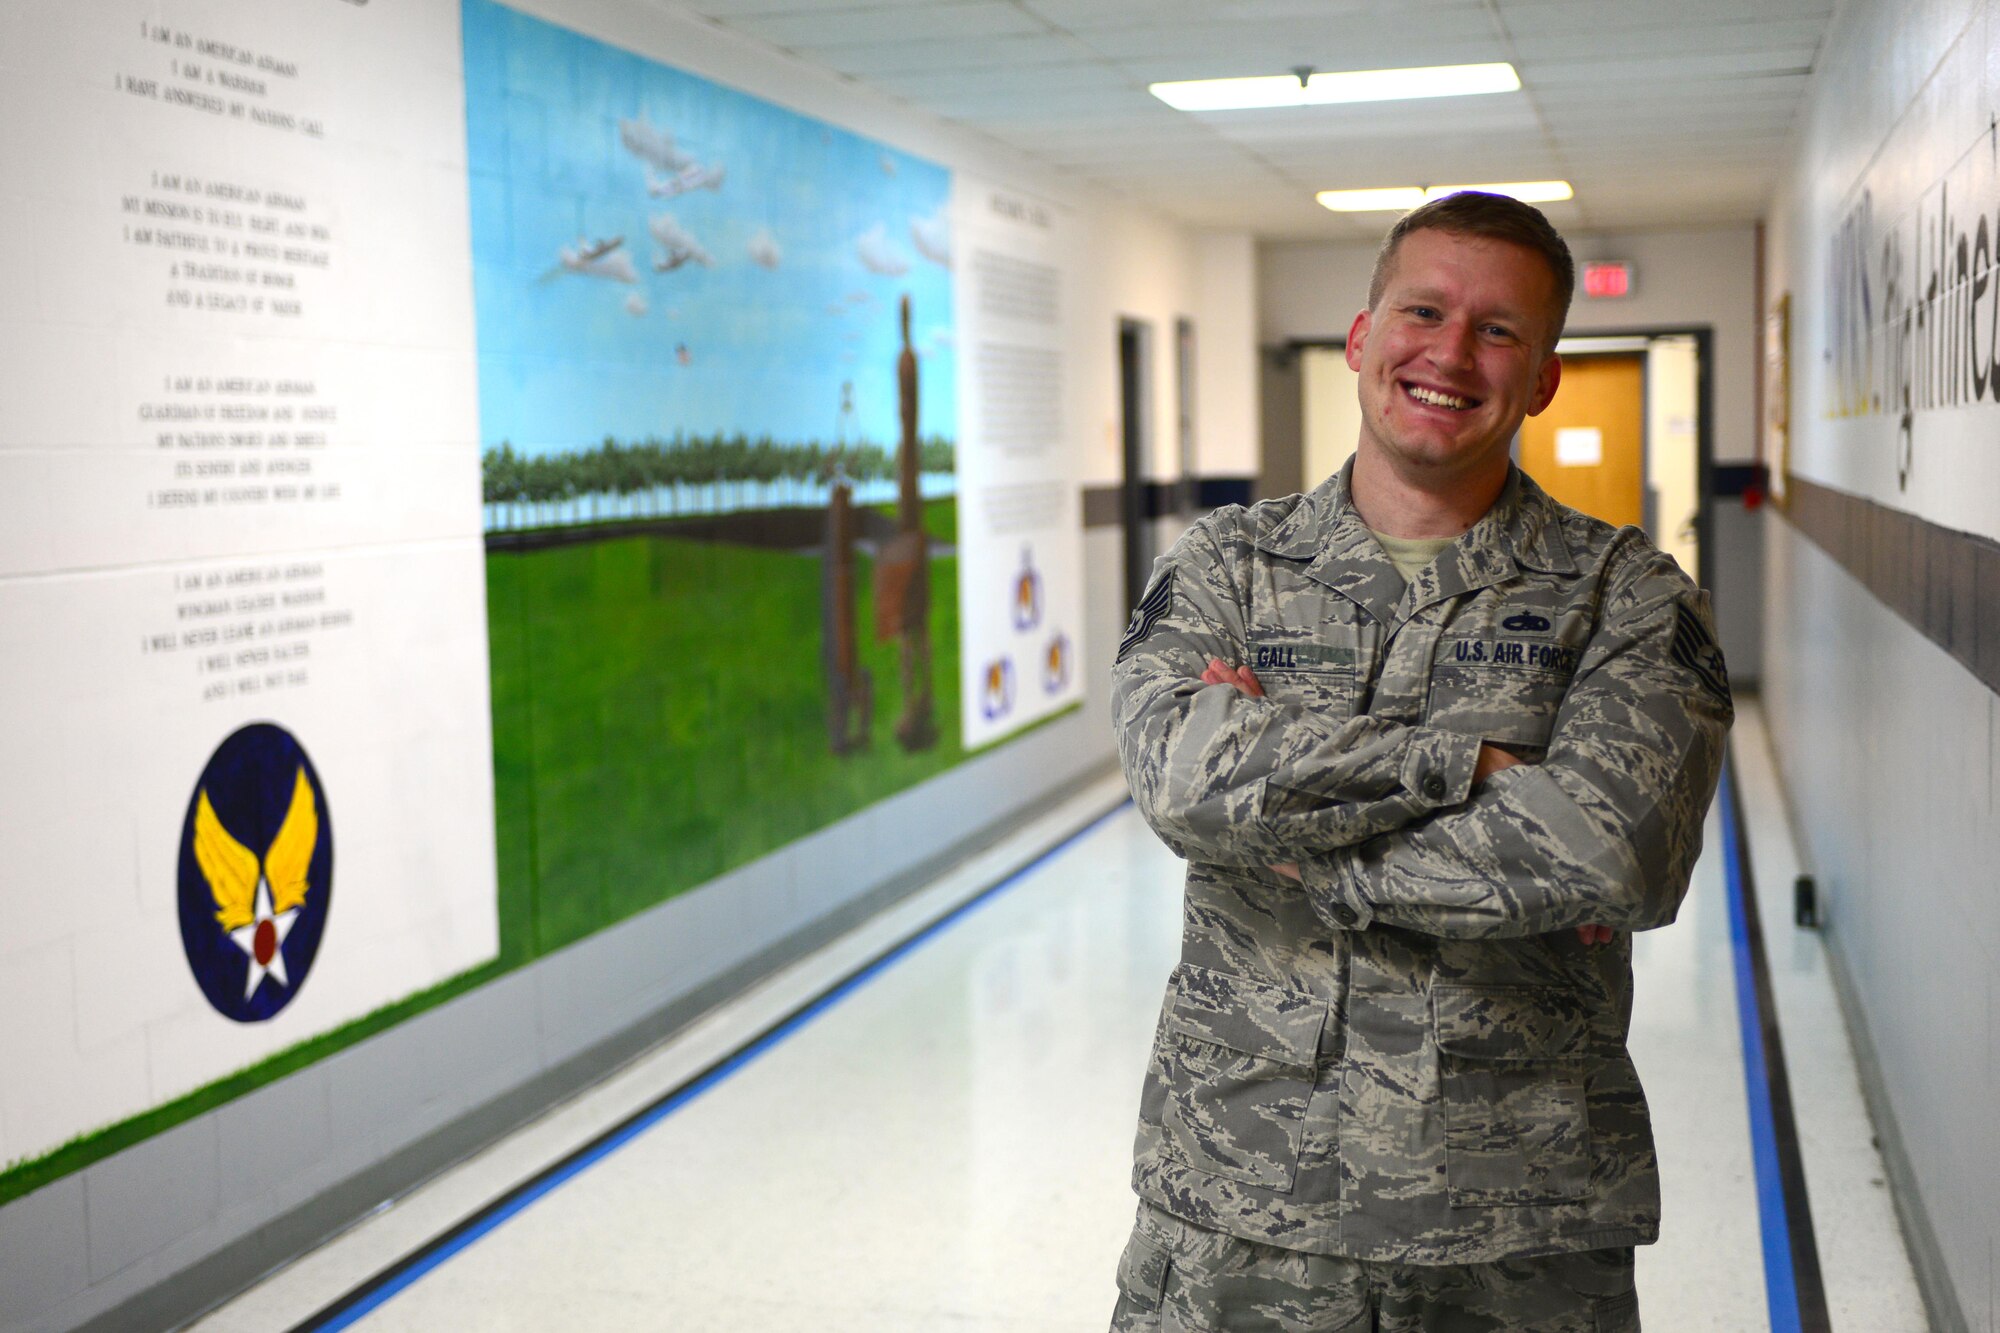 Tech Sgt. Adam Gall, a program manager with the 55th Aircraft Maintenance Squadron at Offutt Air Force Base, Neb., stands in front of a mural he painted in the Bennie Davis Maintenance Facility Oct. 12, 2016. Gall bookended a scene involving aircraft maintained by the 55th Wing with the text of the Airman’s Creed and the Maintenance Creed. (U.S. Air Force photo/Senior Airman Rachel Hammes)